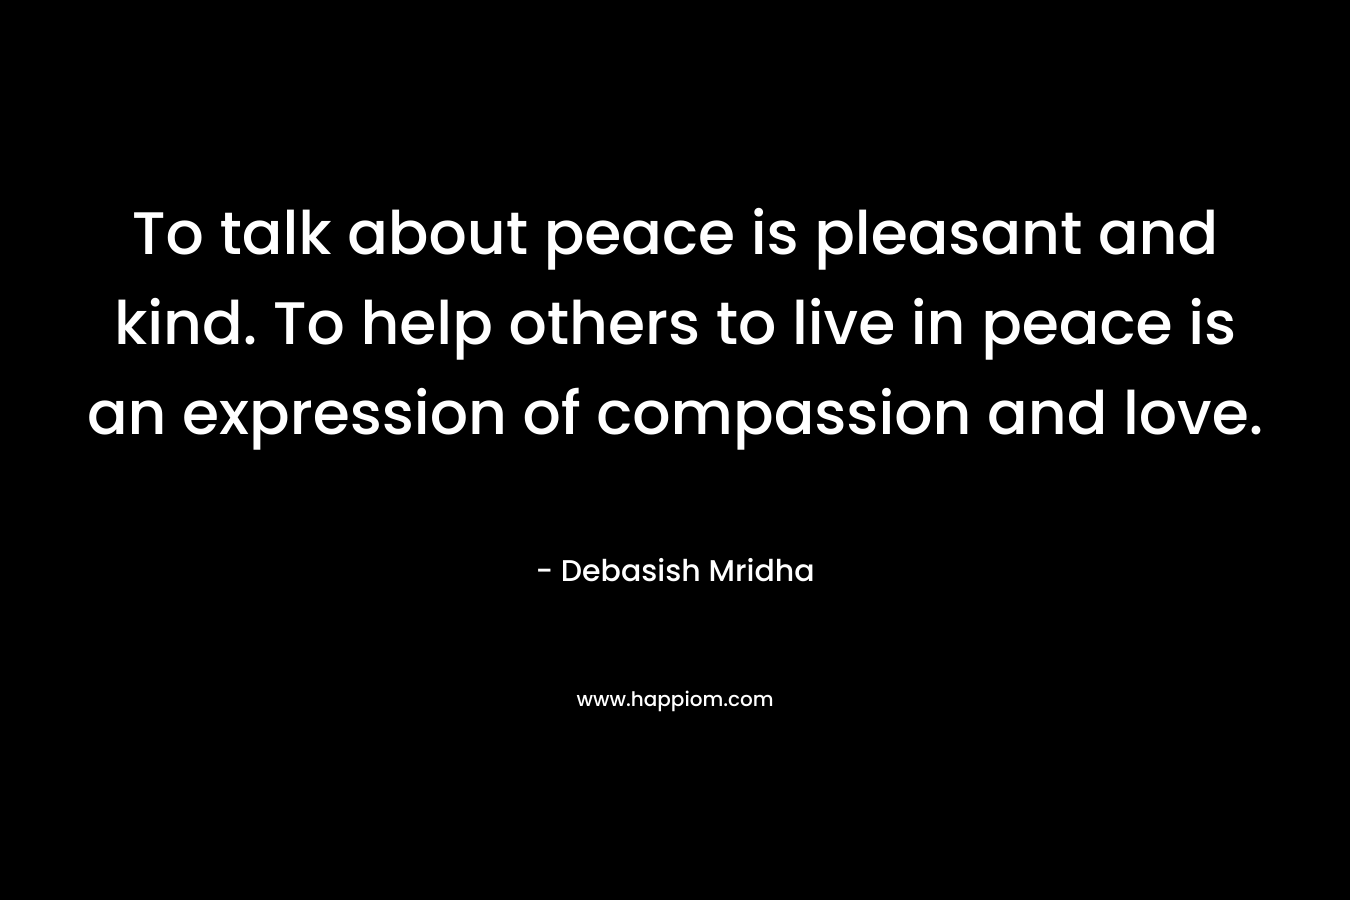 To talk about peace is pleasant and kind. To help others to live in peace is an expression of compassion and love.